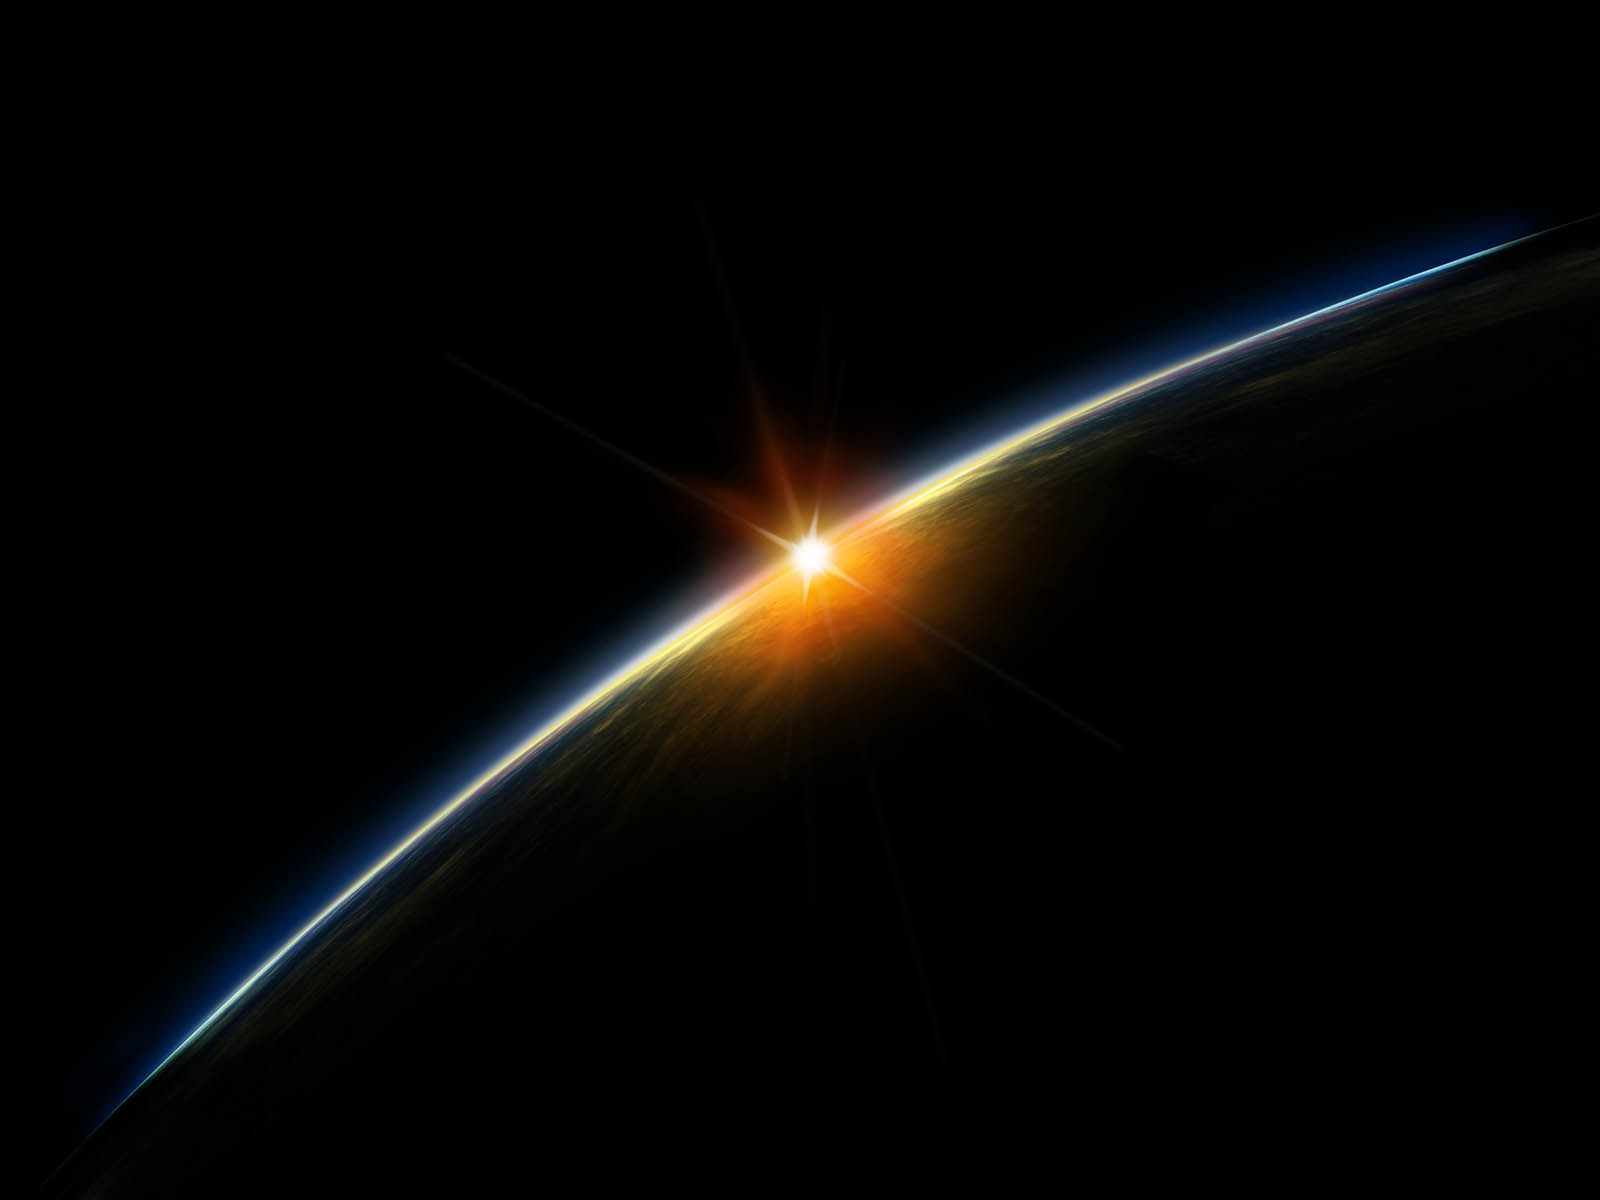  wallpapers Sunrise In Space